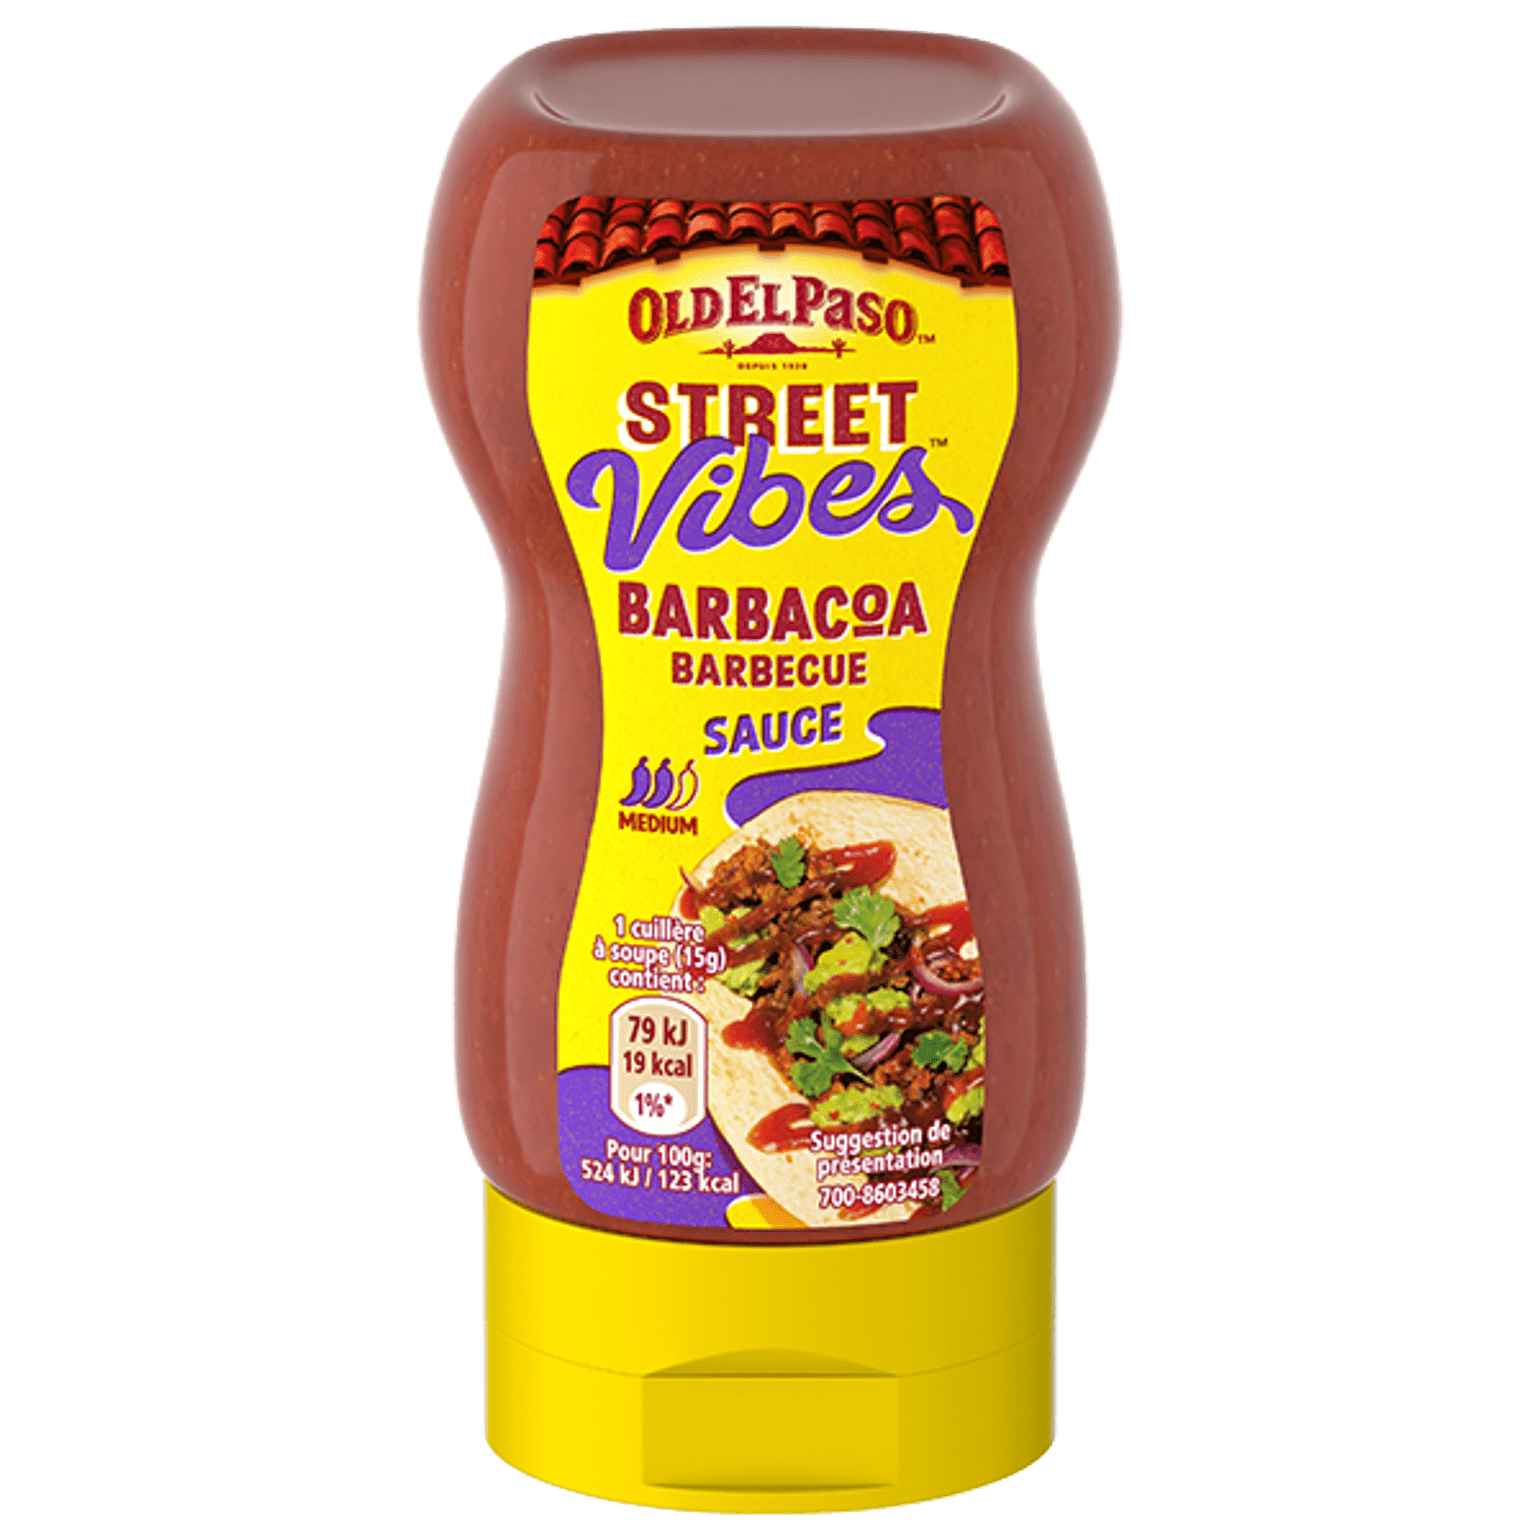 A bottle of Old El Paso Street Vibes Barbacoa Sauce 263g